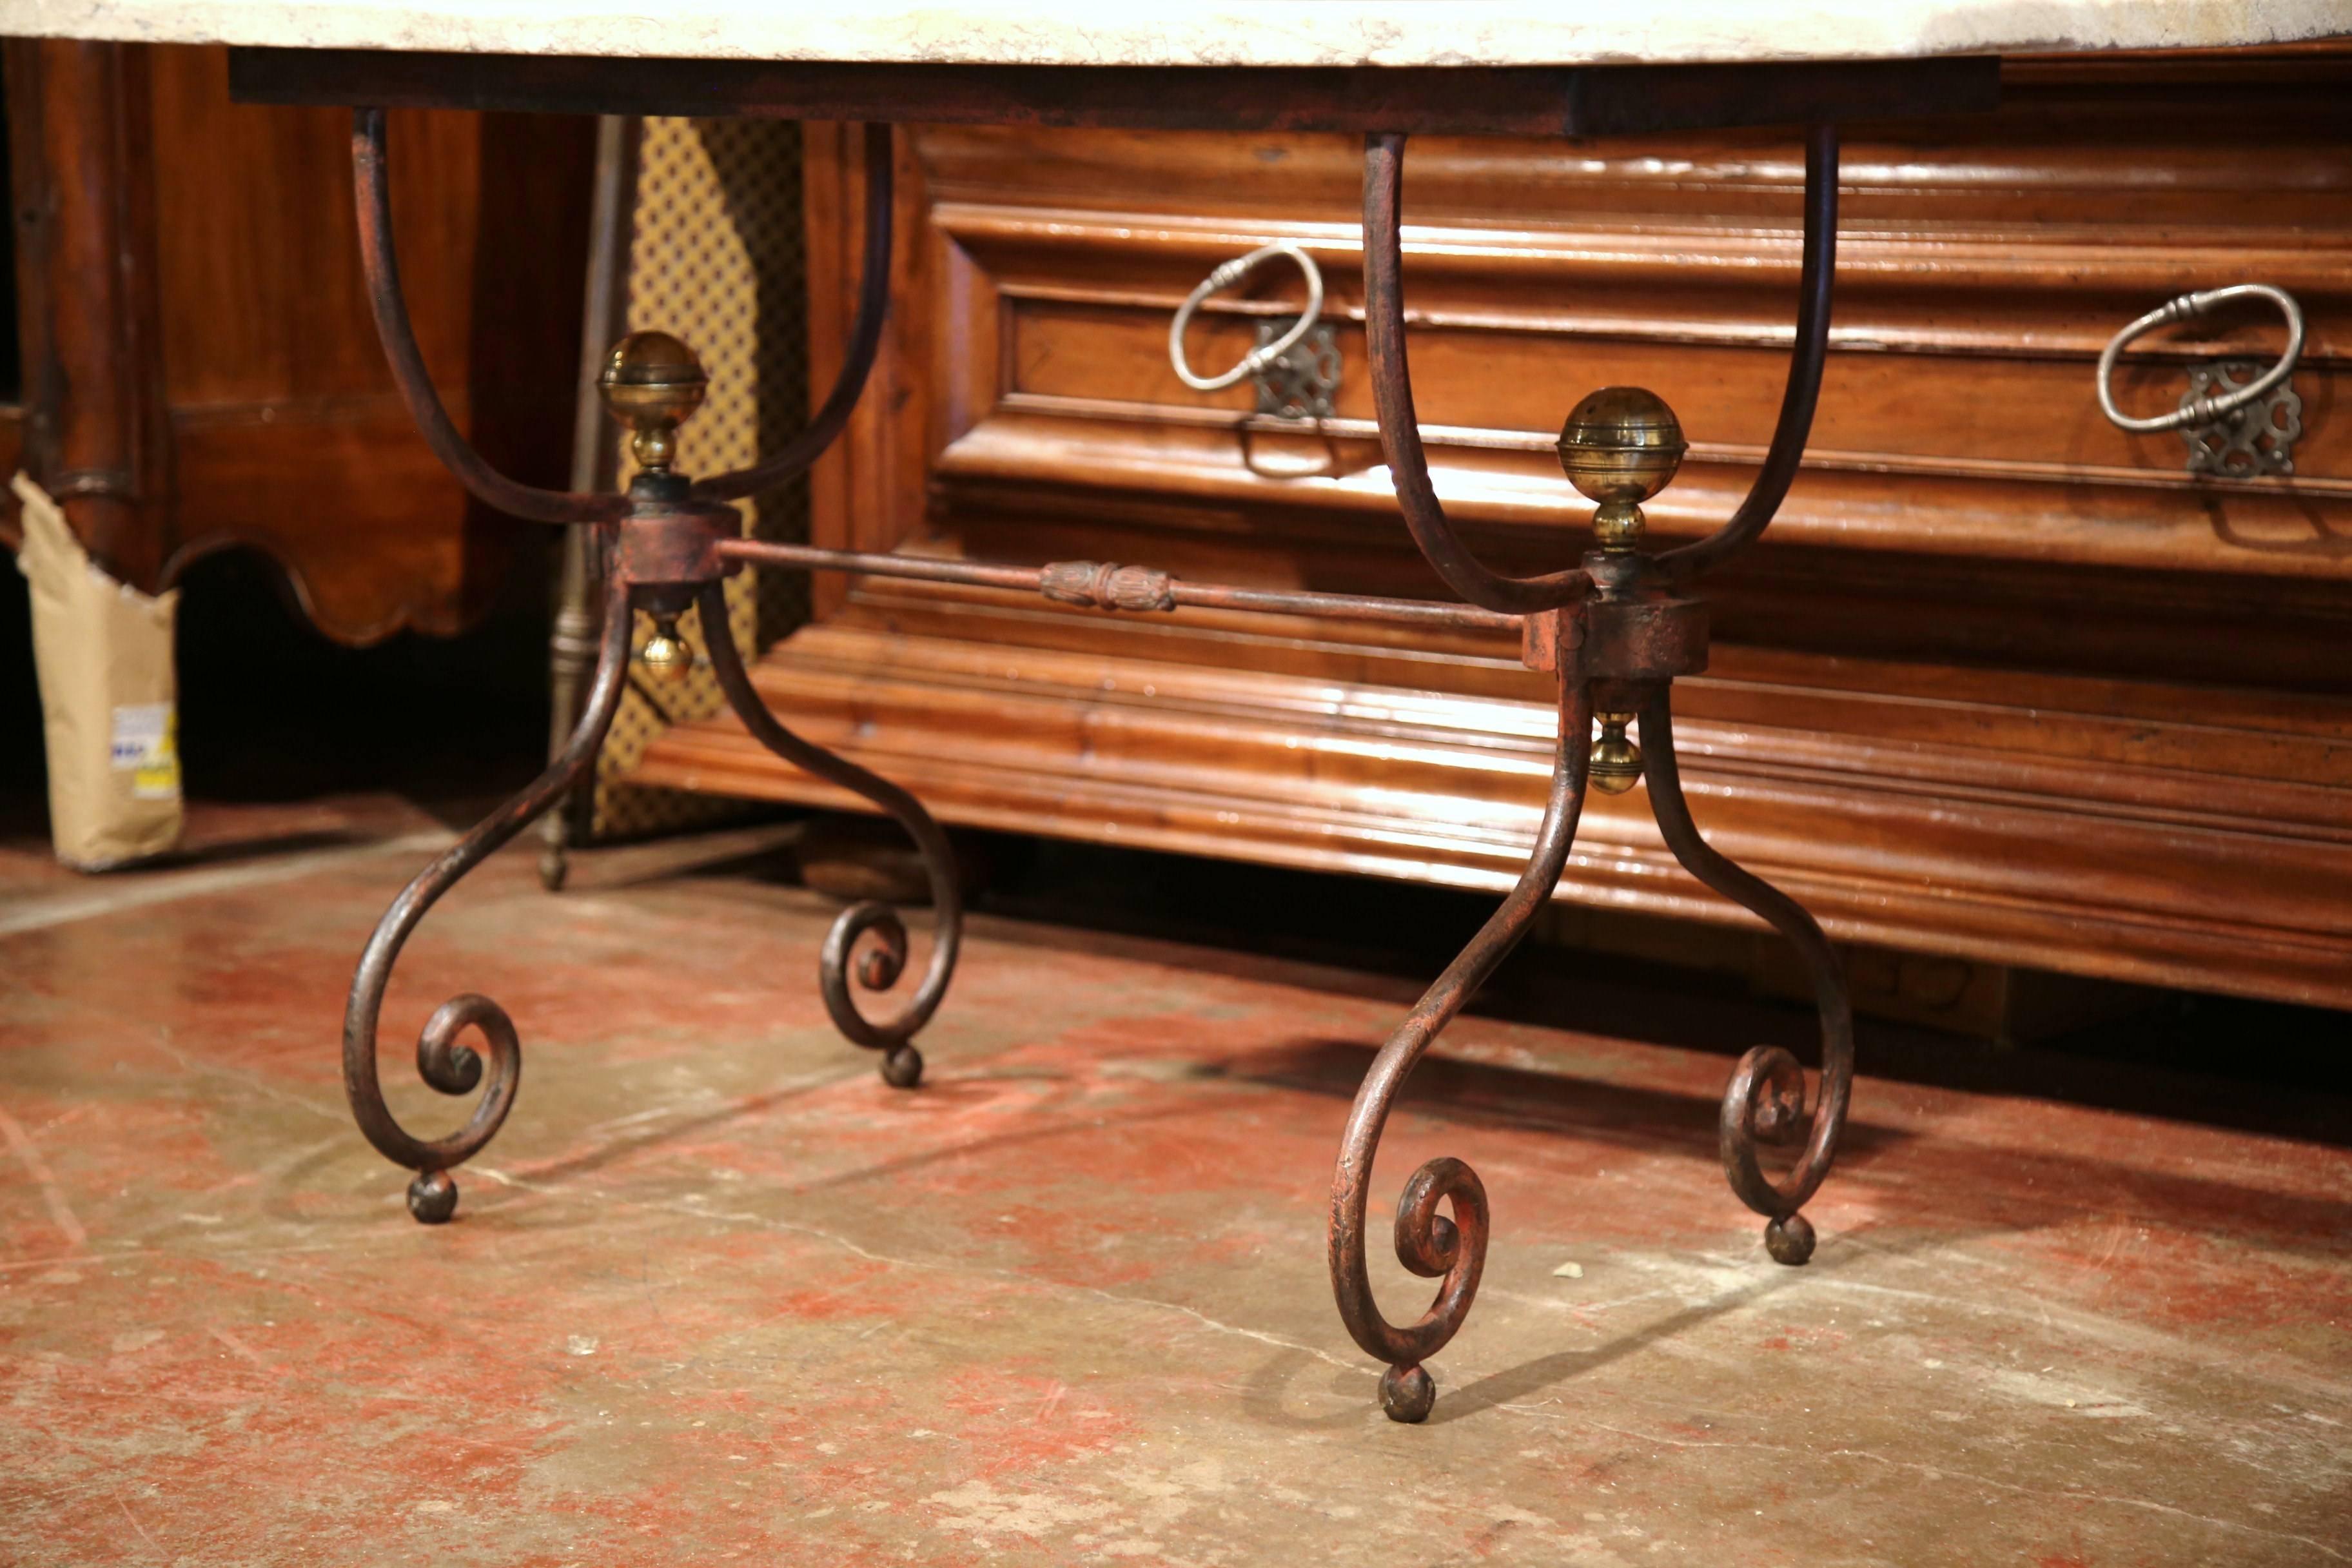 This elegant, antique bistrot table was forged in Paris, France circa 1880. The versatile table could be placed outside or inside, and features two scrolled legs with a stretcher between and decorative bronze finials. The piece has its original